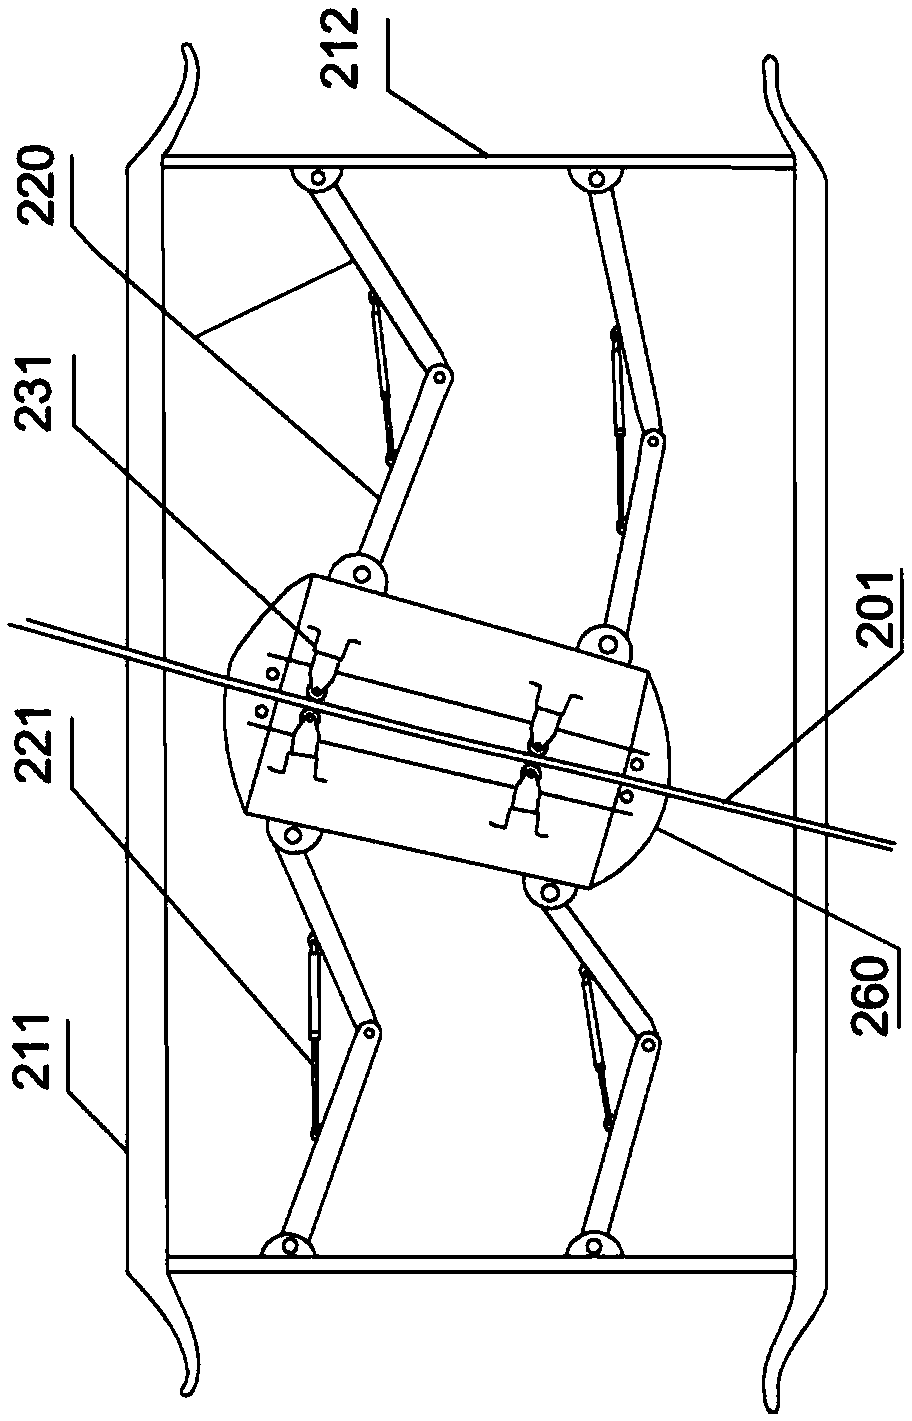 Crack detection system and method for high-speed rail contact line based on laser ultrasound